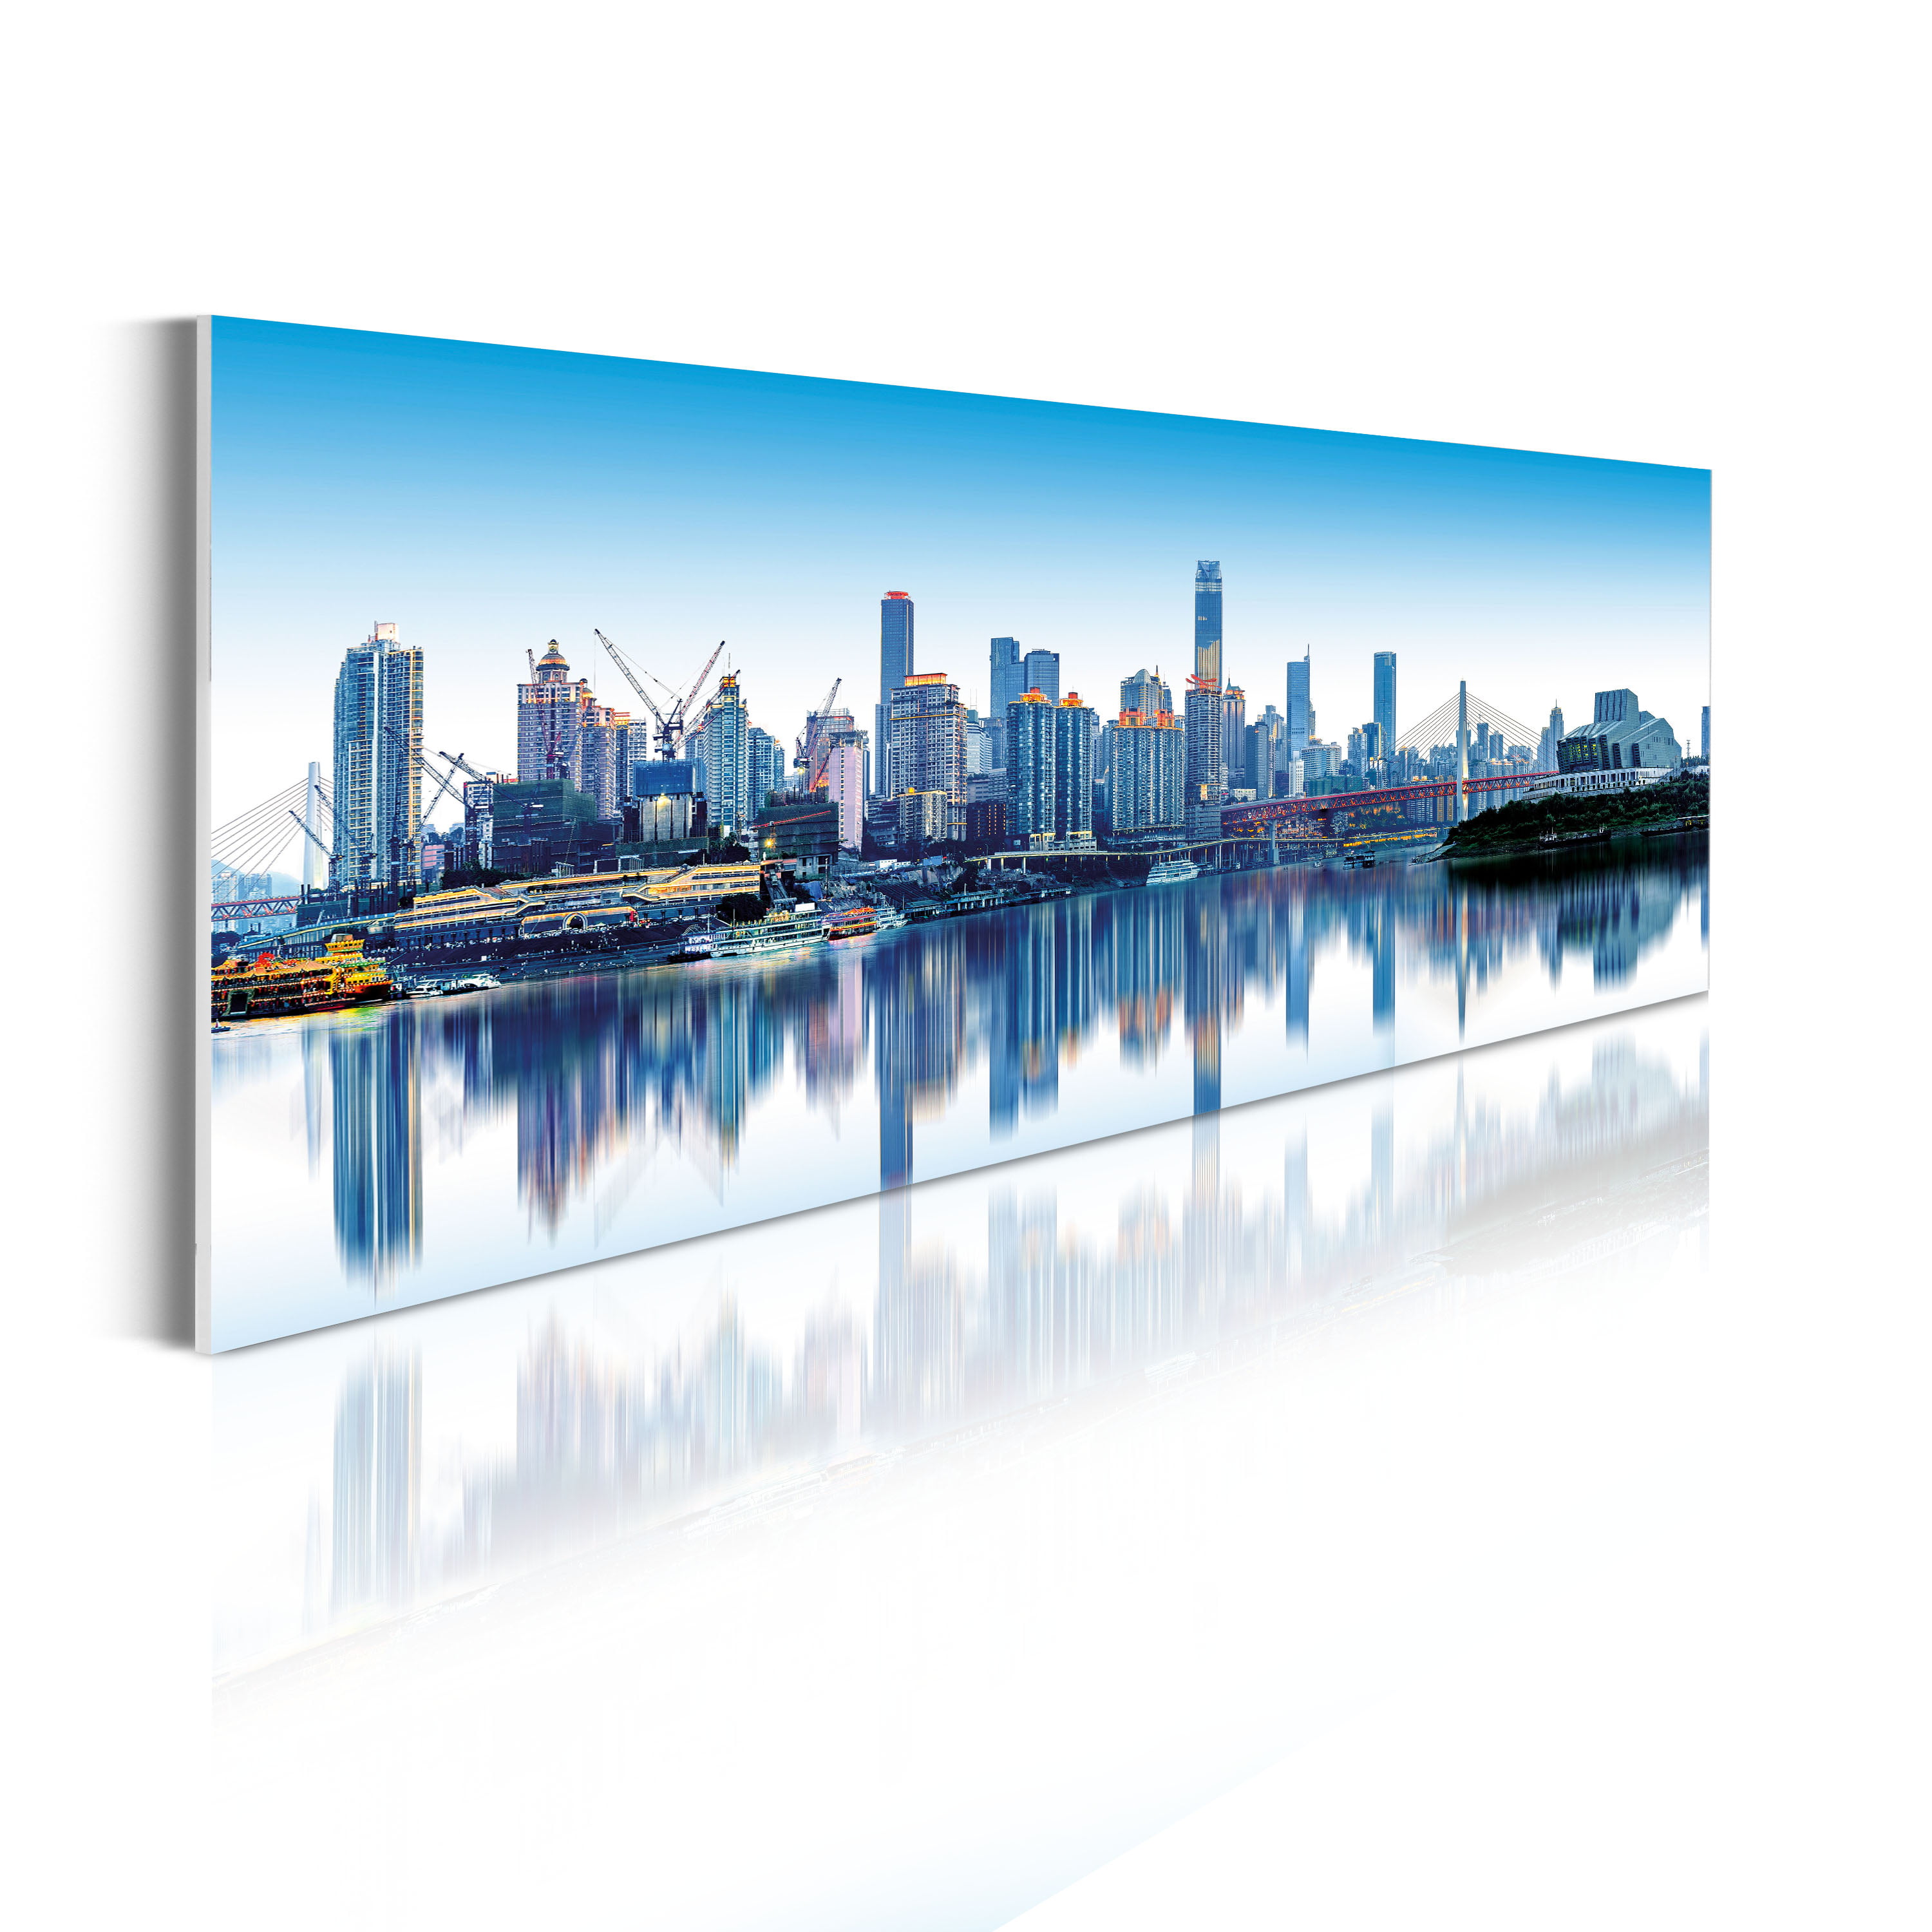 Low Angle View Sky Cityscape Skyscrapers Wall Art Architectural Canvas Wall Art Living Room Architectural Art Prints Bedroom Wall Art